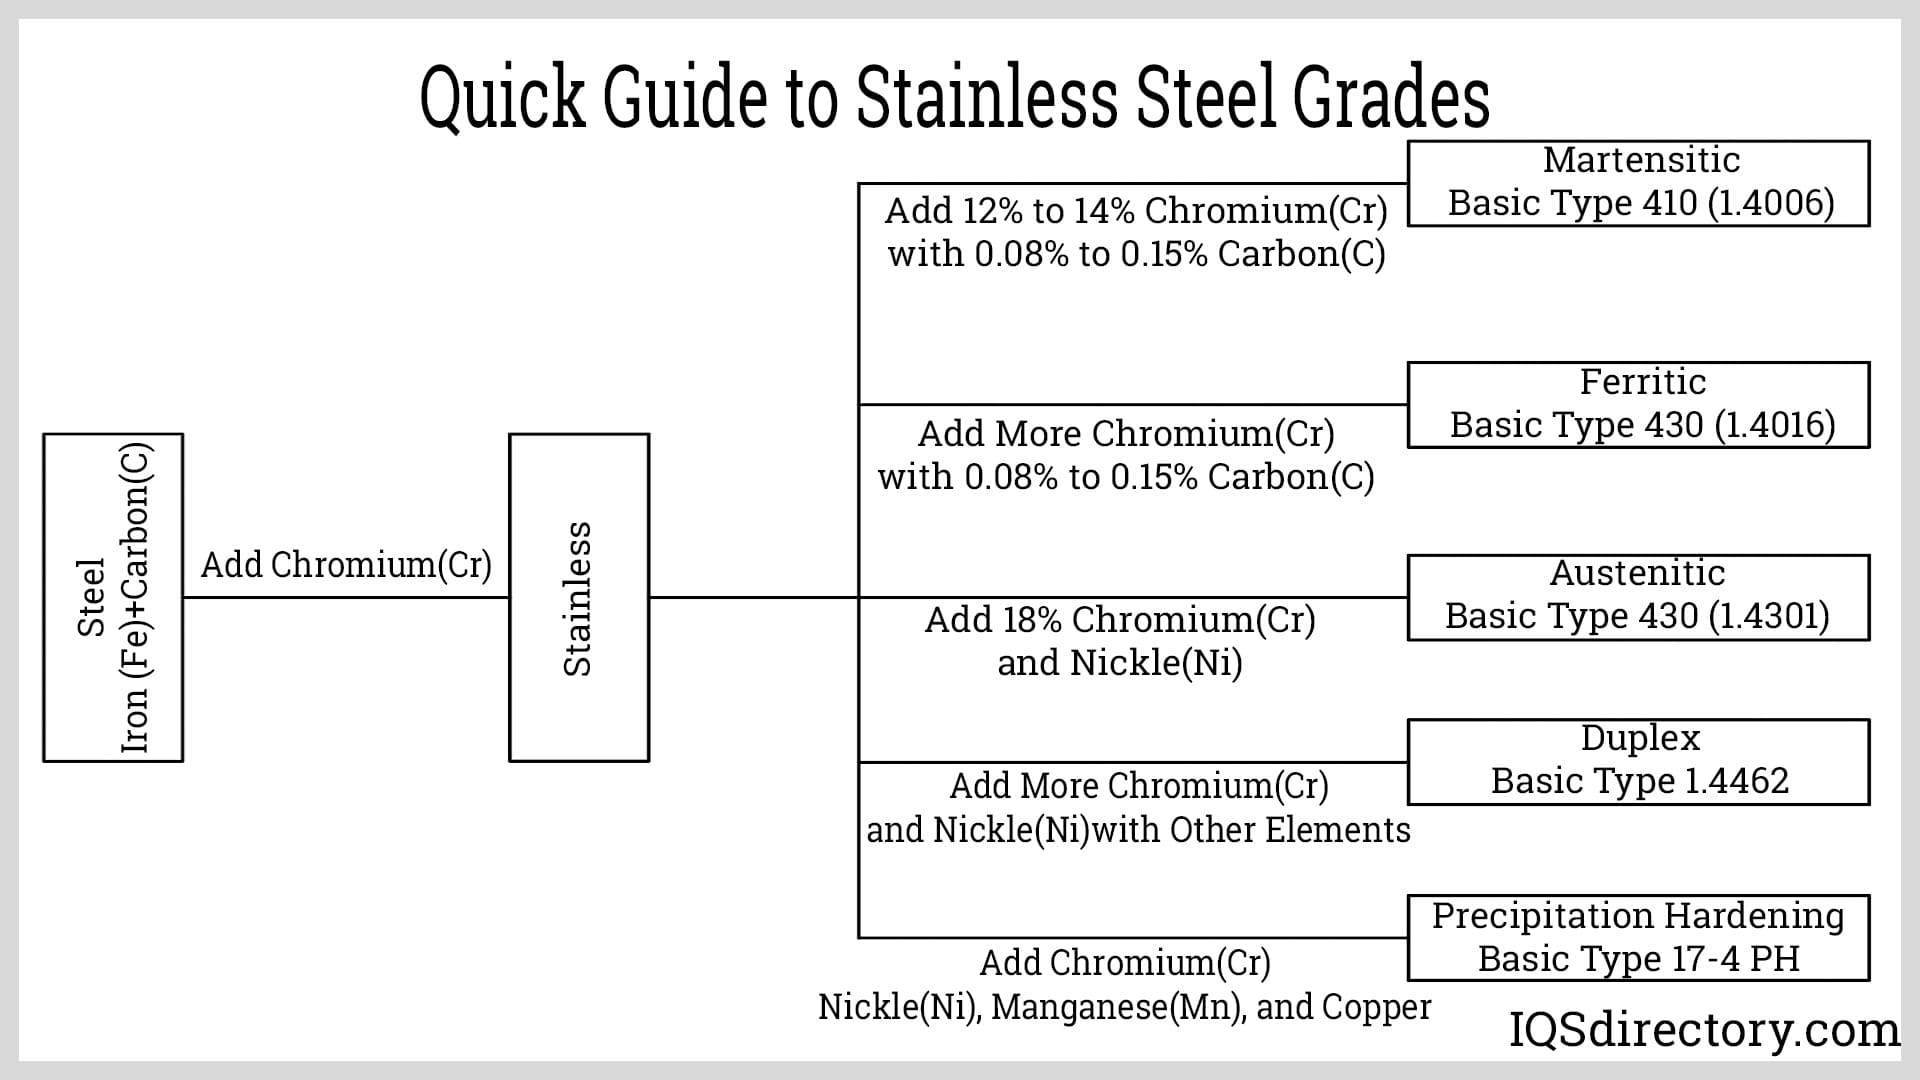 Quick Guide to Stainless Steel Grades